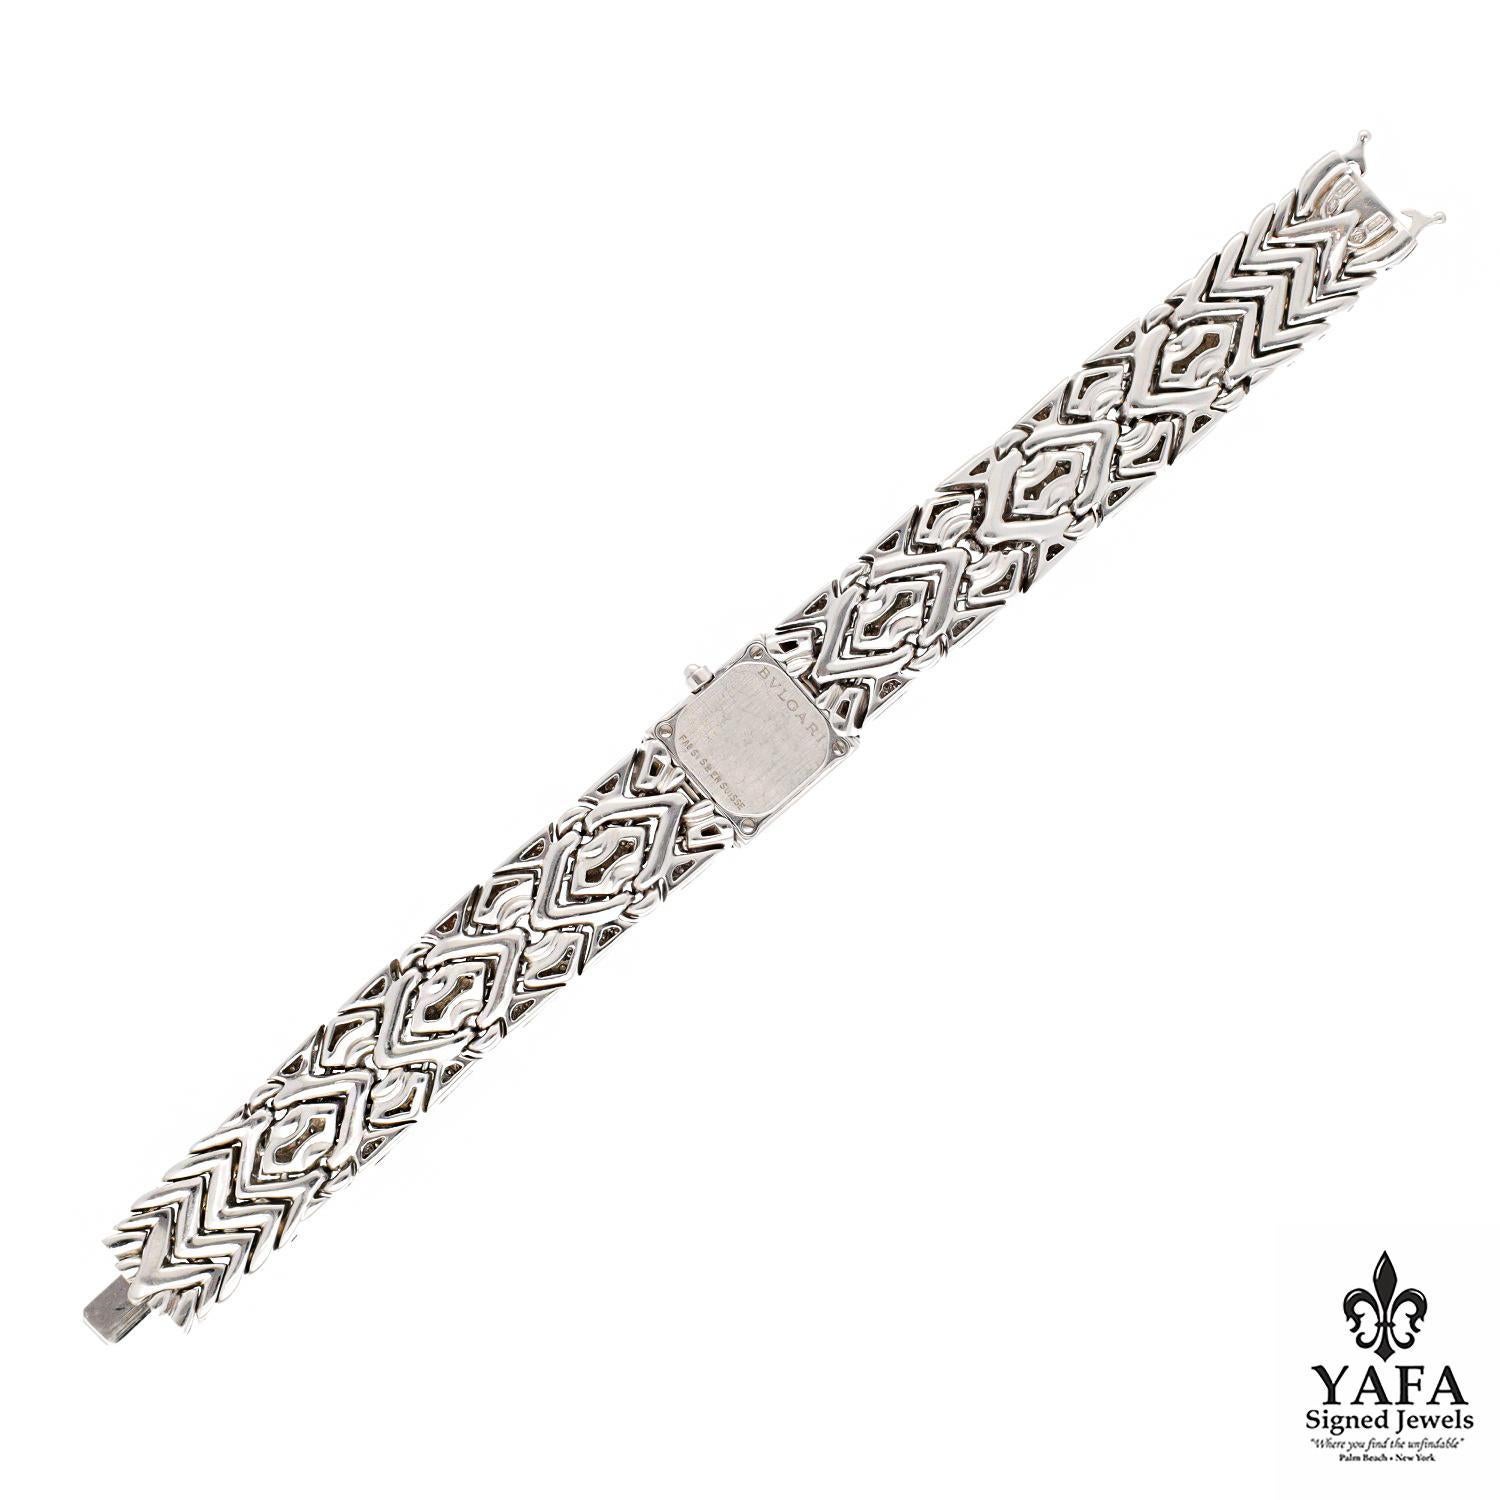 BVLGARI Trika 18K White Gold All Diamond Pave Watch In Excellent Condition For Sale In New York, NY